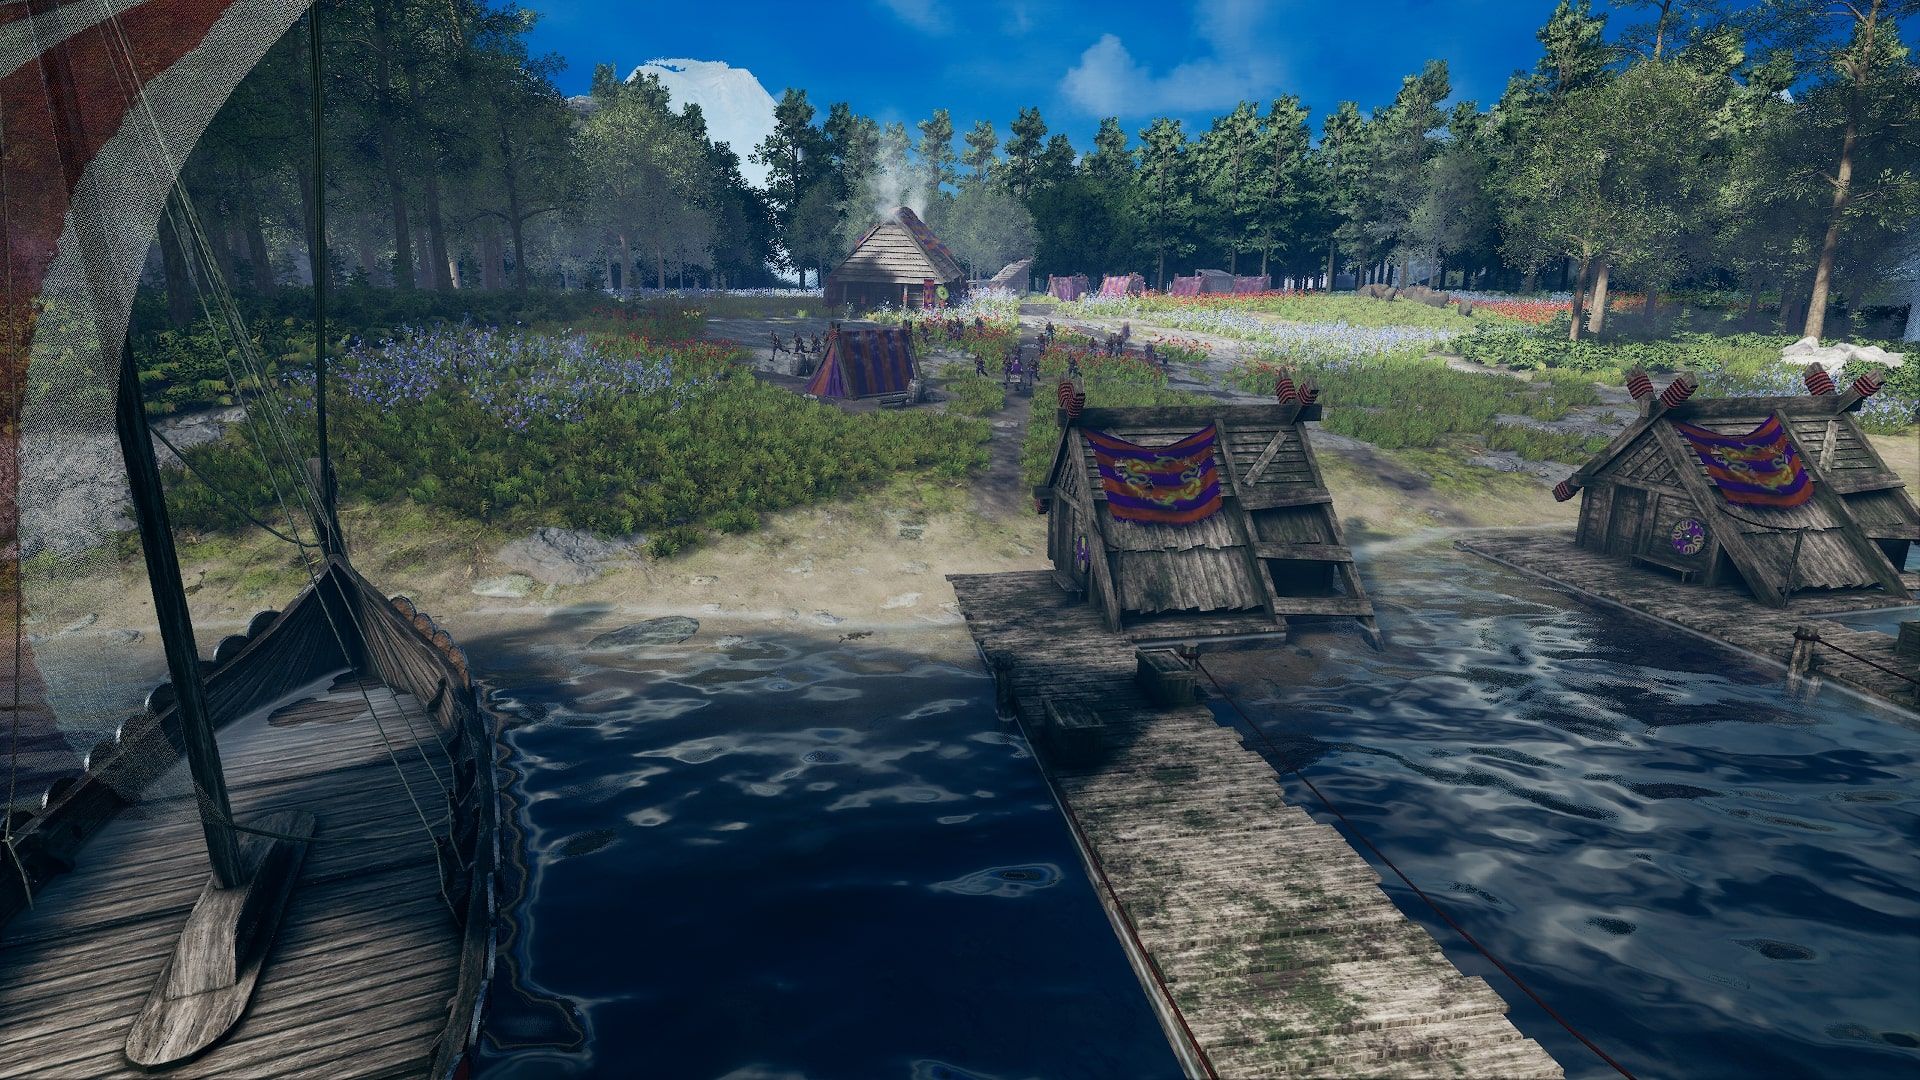 Frozenheim Army retreating to boats to escape Jarl Erland